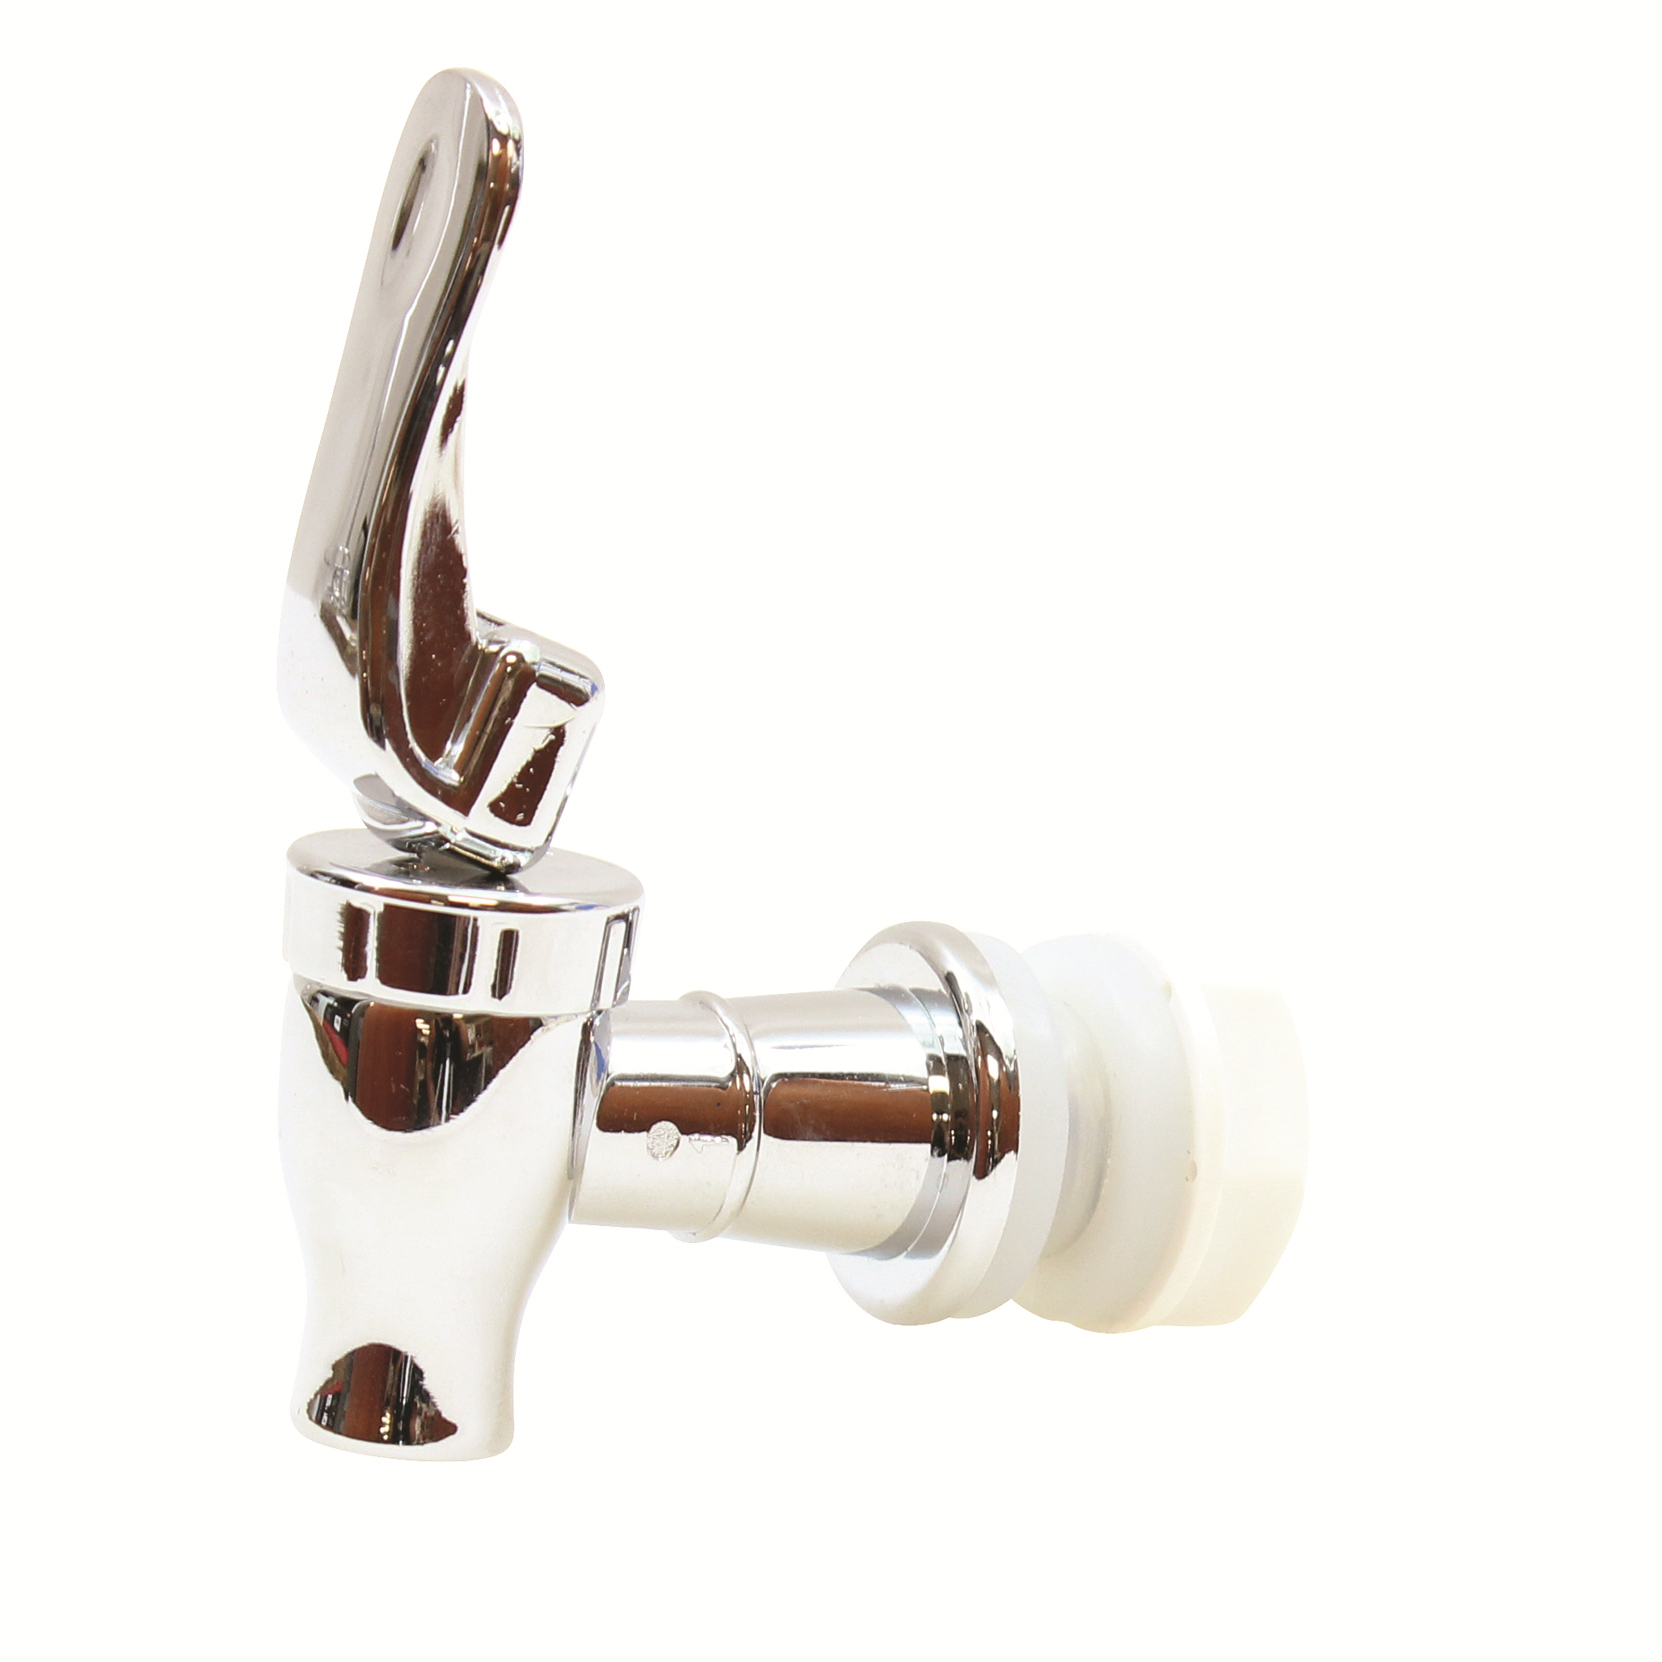 TABLECRAFT REPLACEMENT FAUCET  FOR BAD1500 AND GLASS 